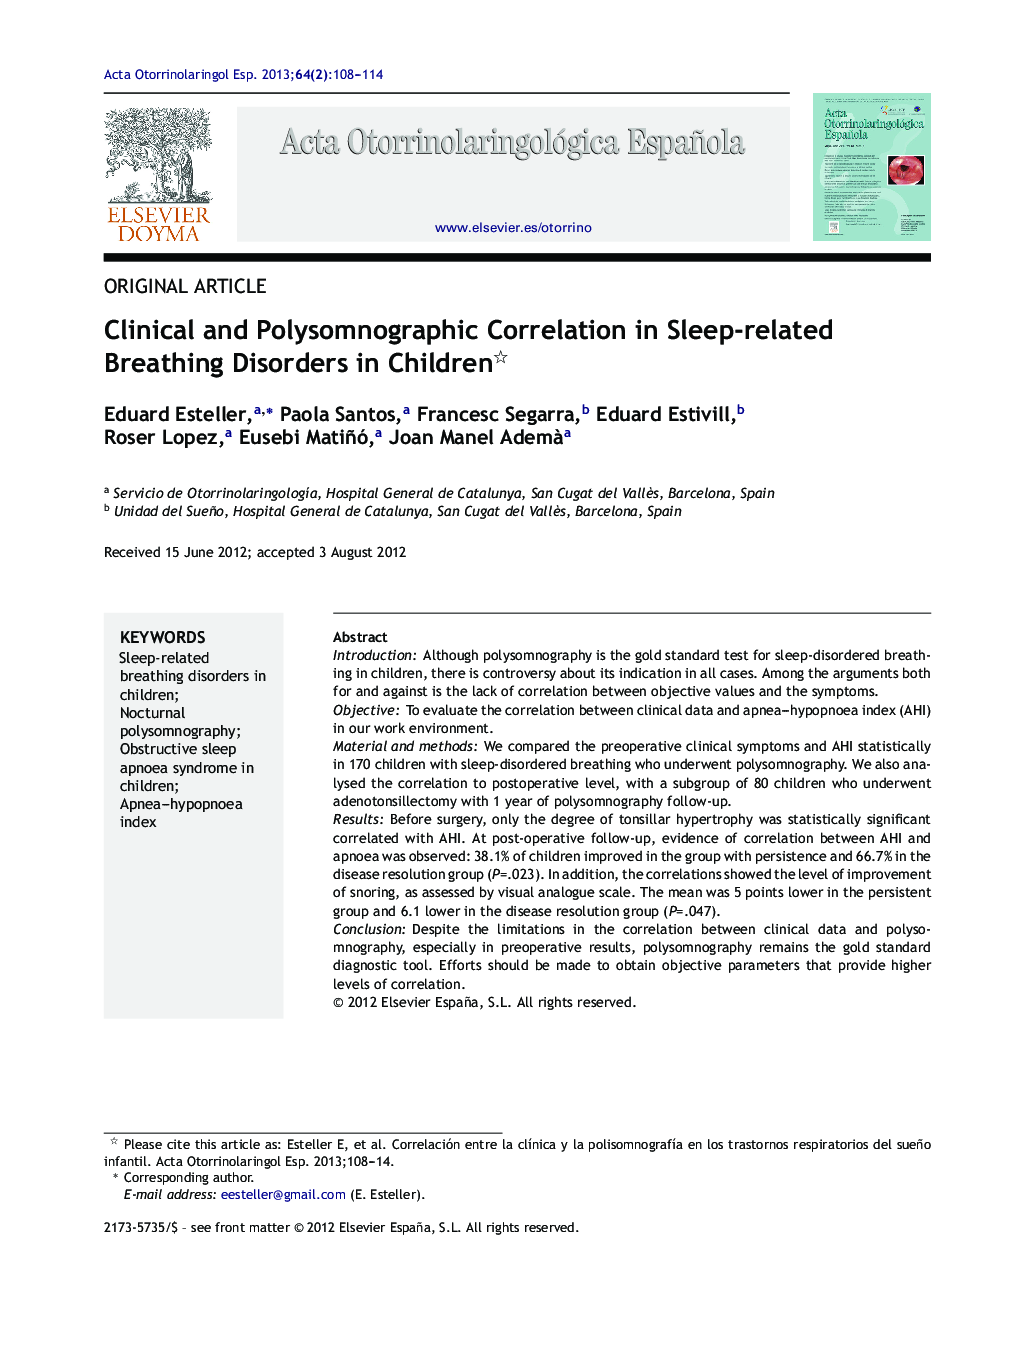 Clinical and Polysomnographic Correlation in Sleep-related Breathing Disorders in Children 